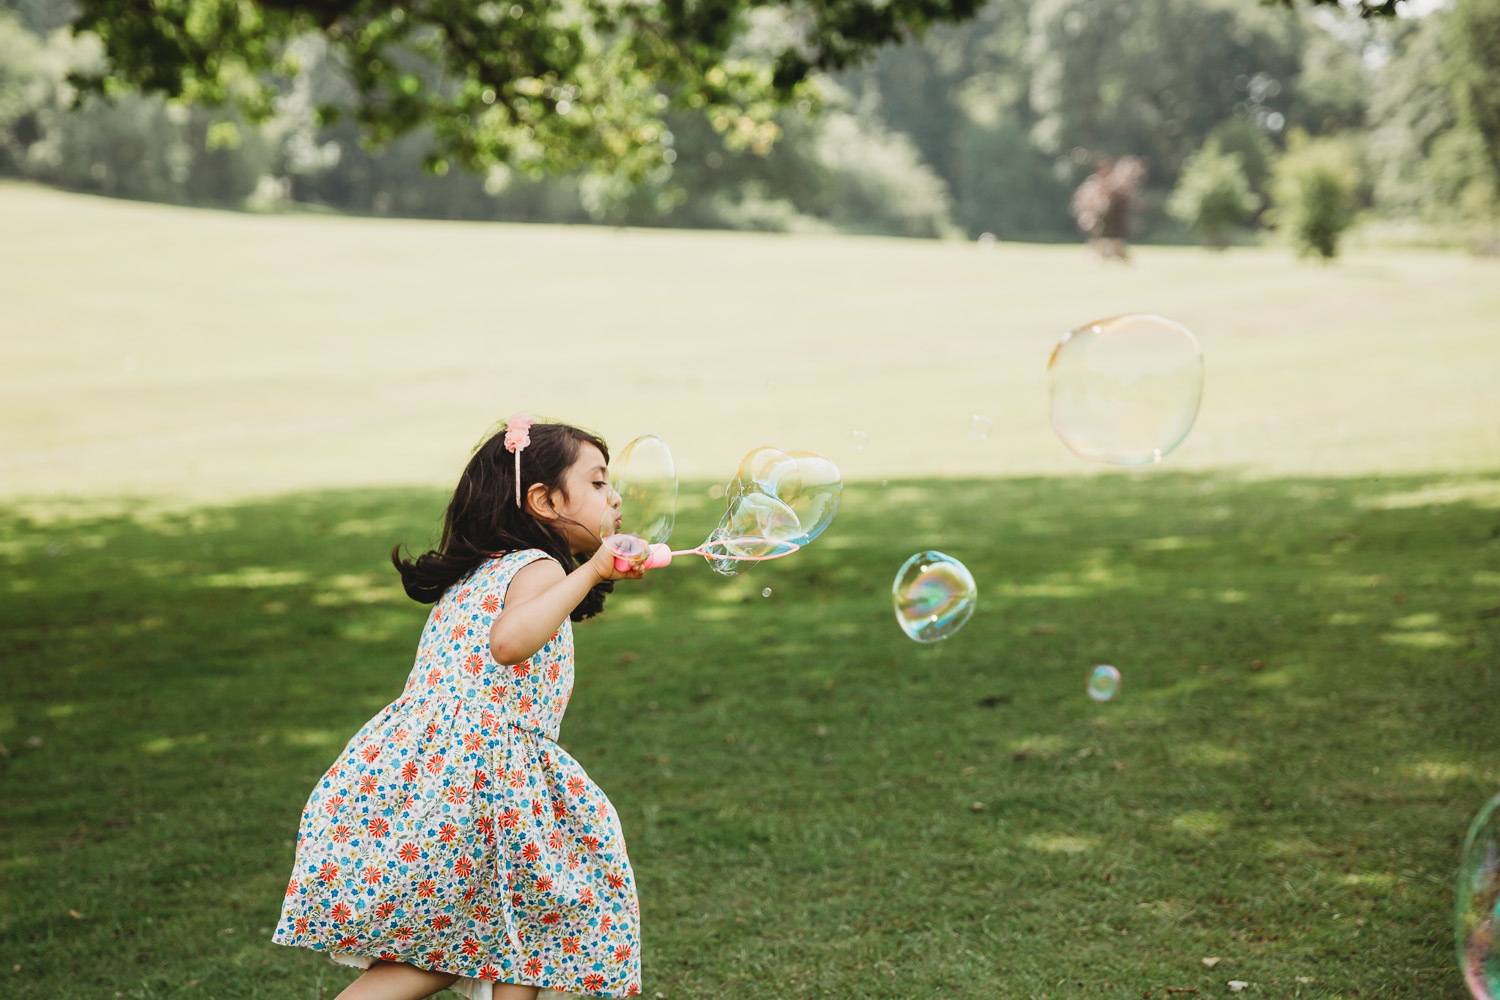 Girl of four blows bubbles in the park